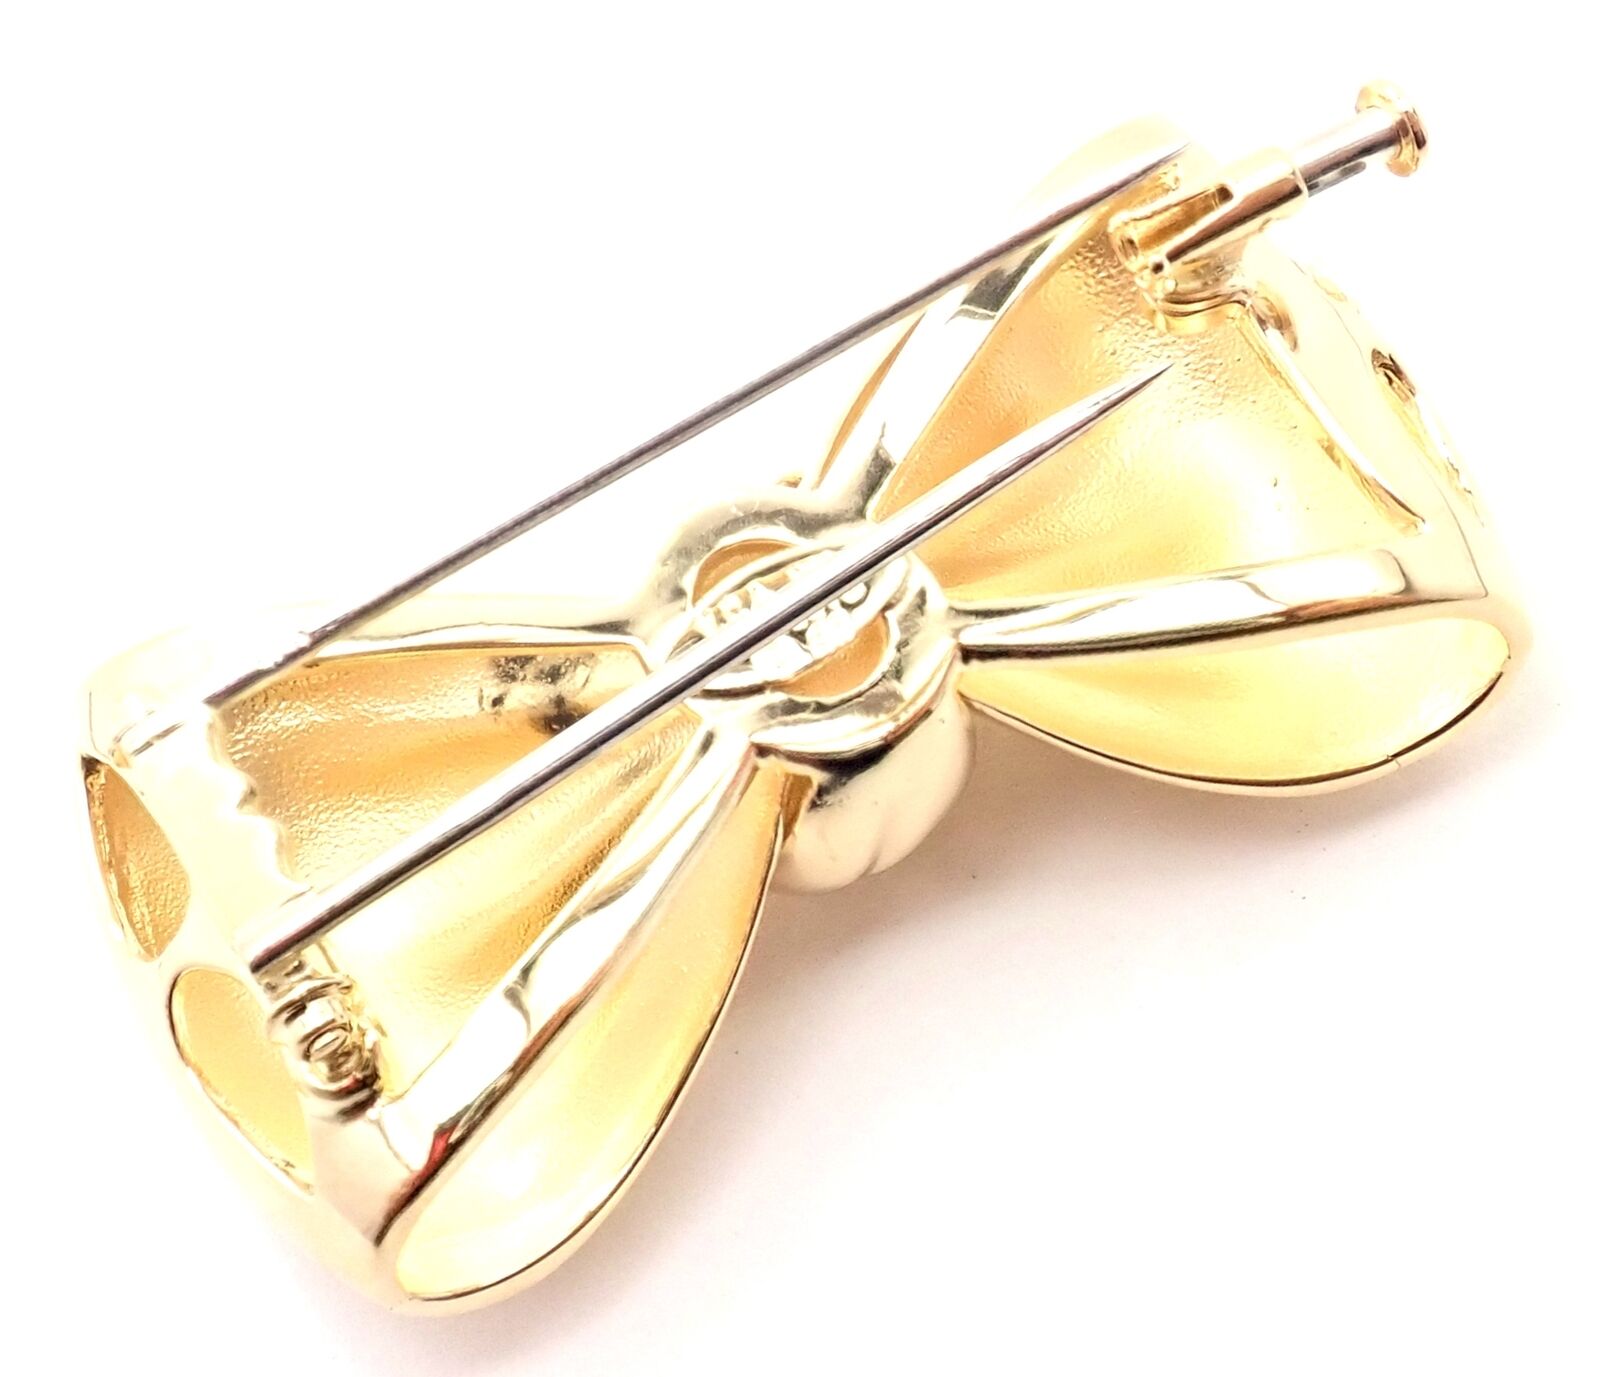 Van Cleef & Arpels Jewelry & Watches:Fine Jewelry:Brooches & Pins Rare! Authentic Van Cleef & Arpels 18k Yellow Gold Bow Design Pin Brooch